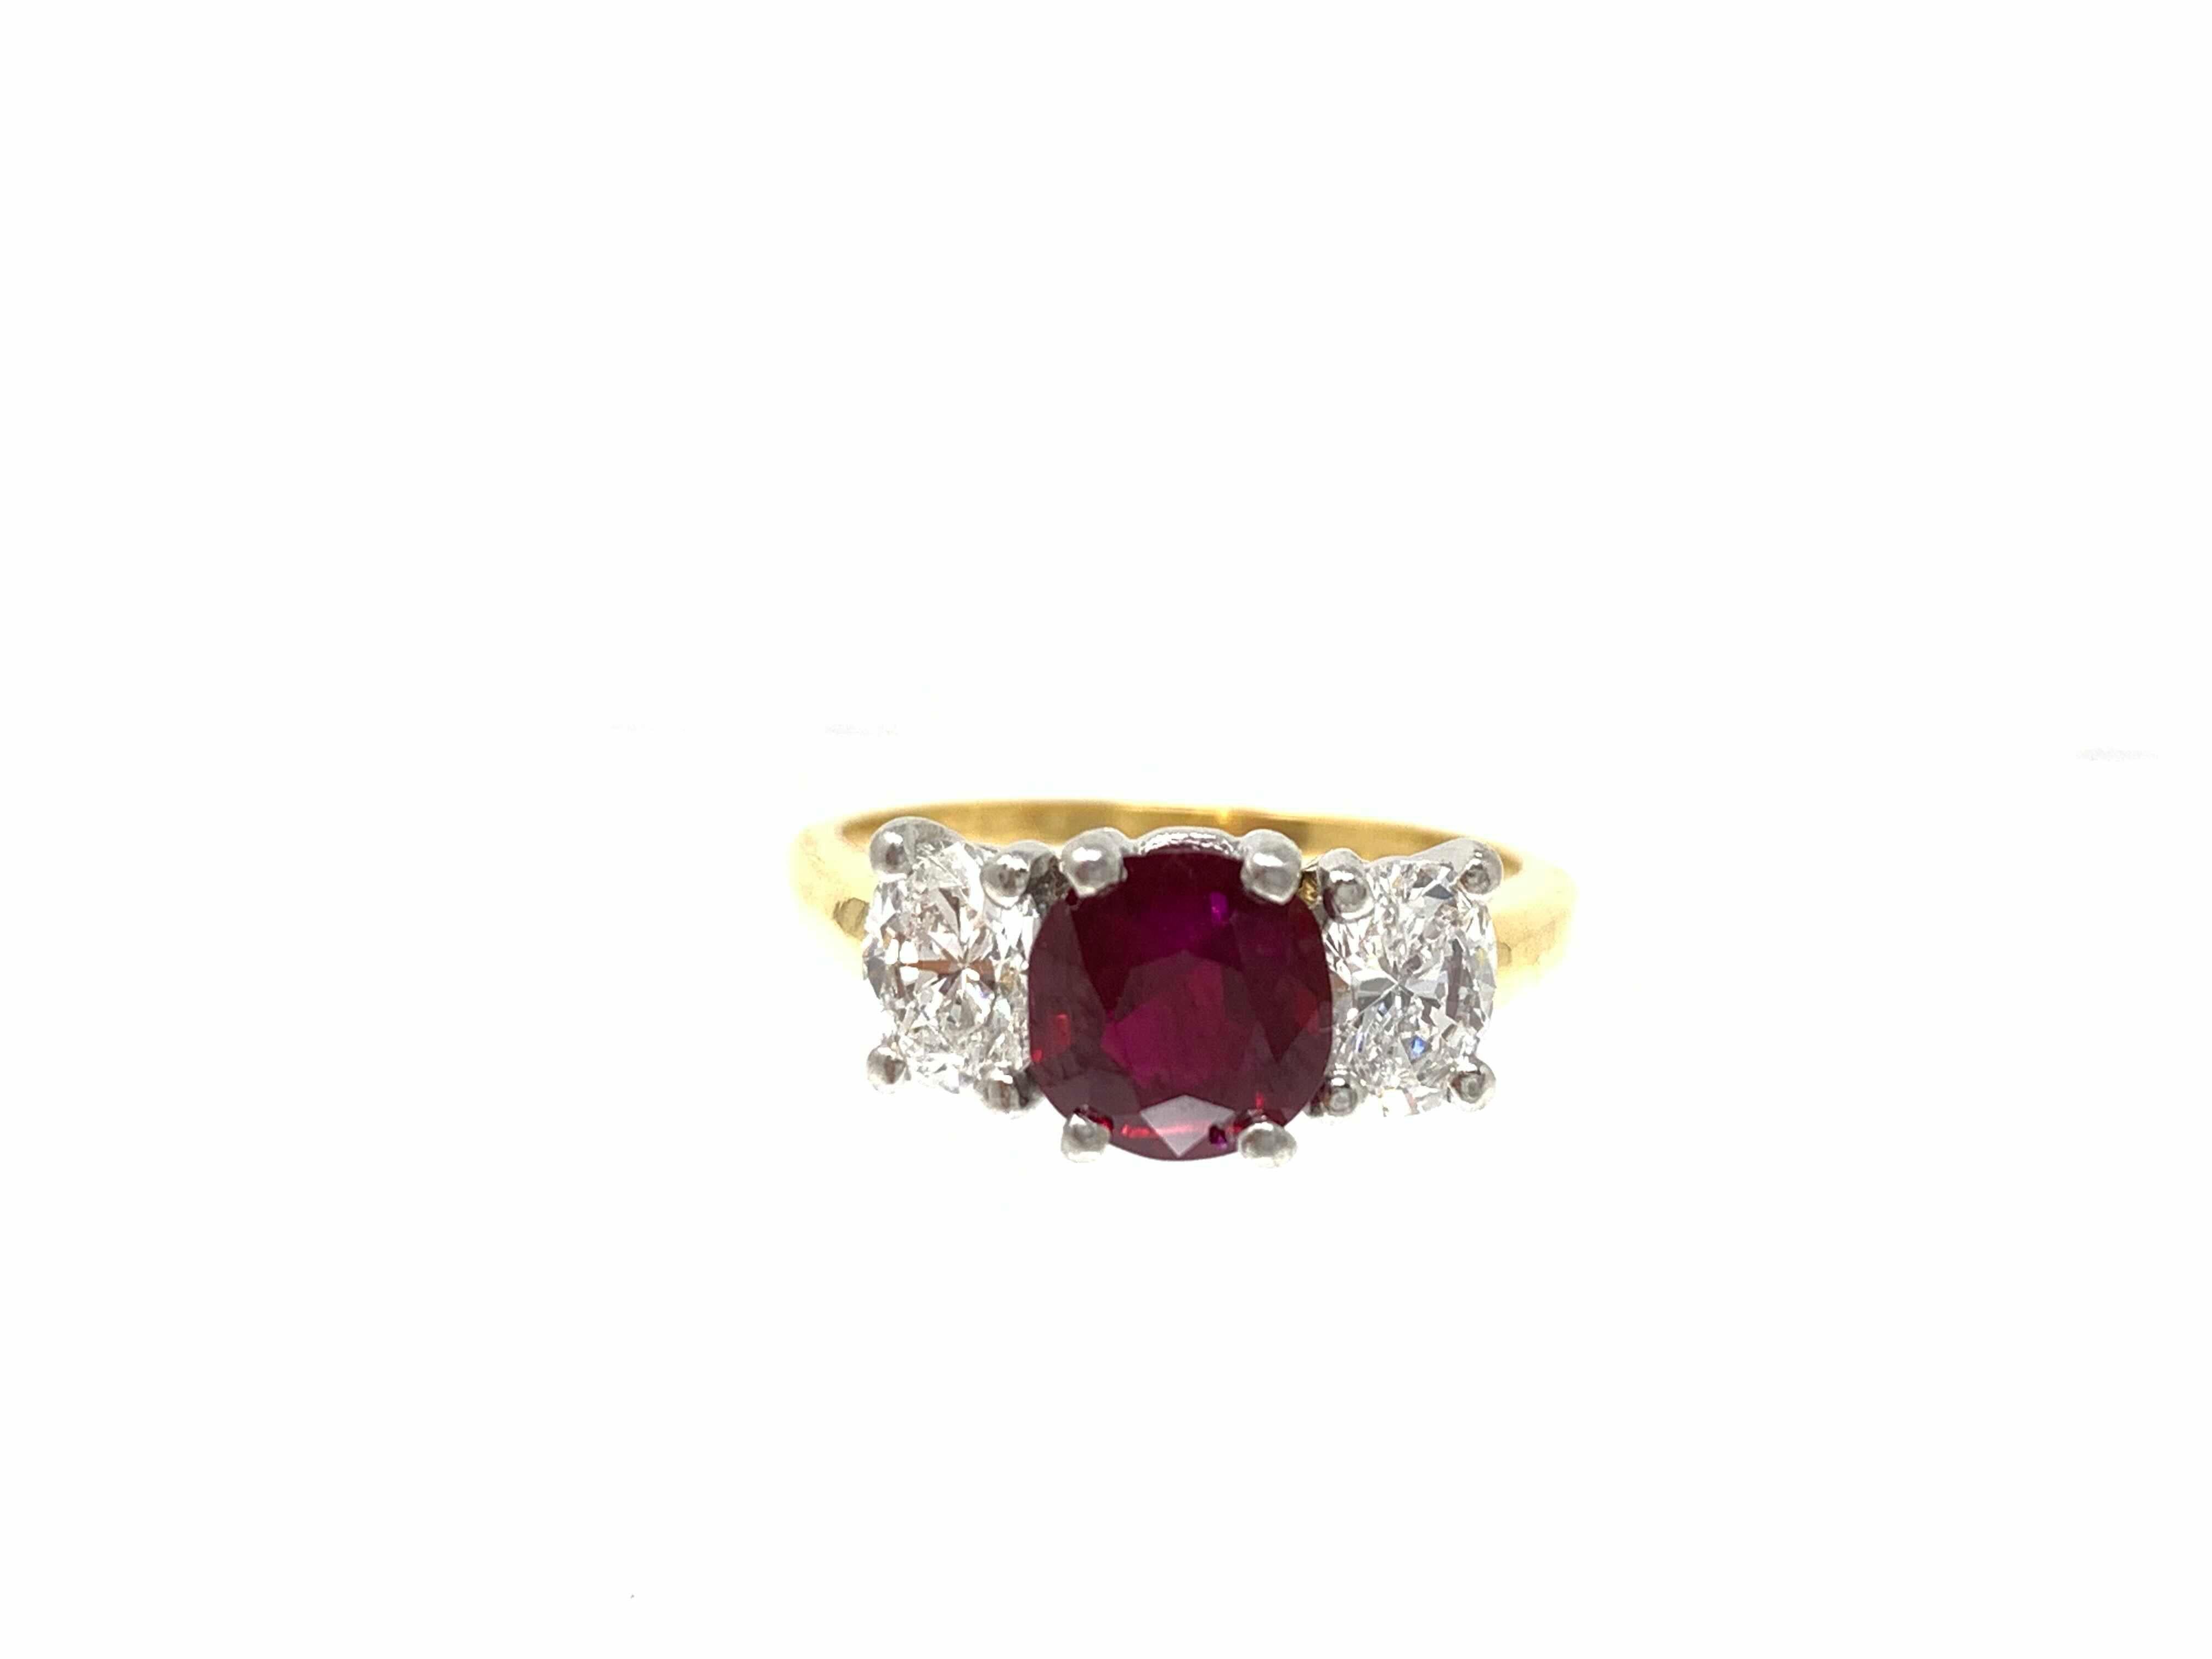 Special and elegant ruby and diamond ring hand crafted in Platinum and designed and created by Moguldiam Inc. 
Ruby weight: 1.42 carat 
White diamond : 1 carat 
Metal : Platinum 
Ring size : 5 3/4 and can be resized. 
The ruby is gorgeous red and